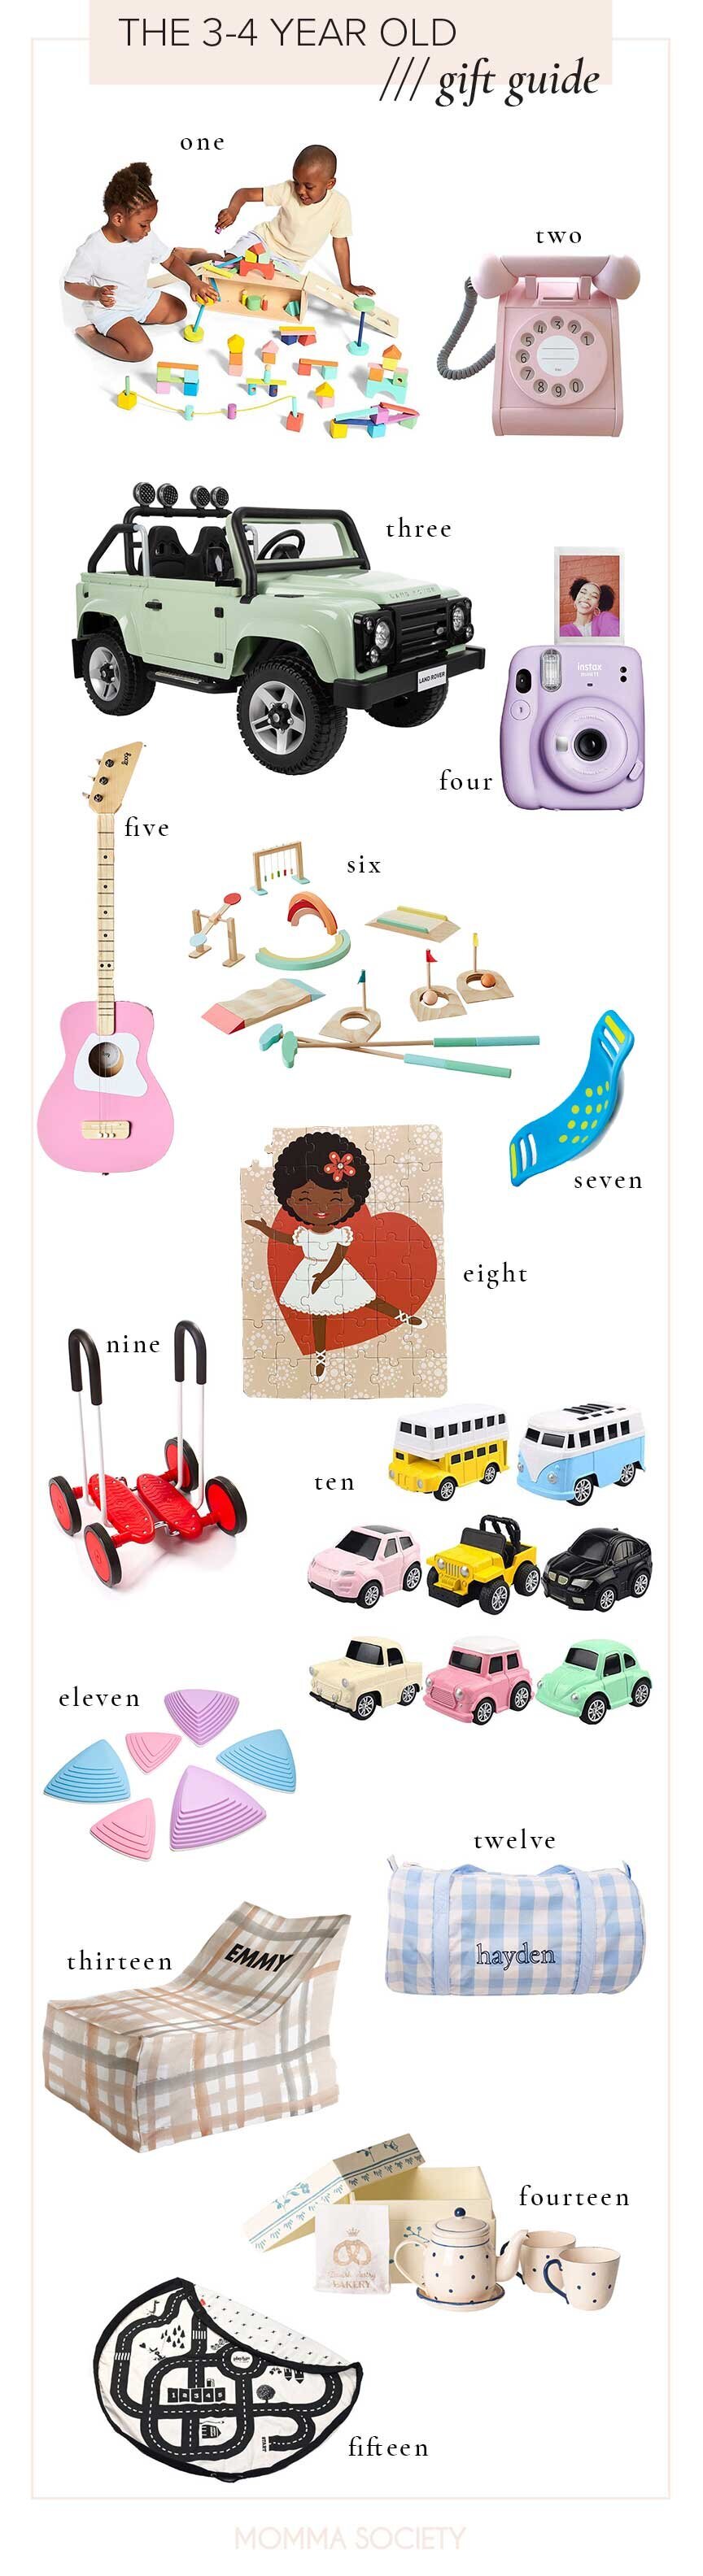 The Ultimate Toddler Girl Gift Guide For Christmas (18 months - 3 years)